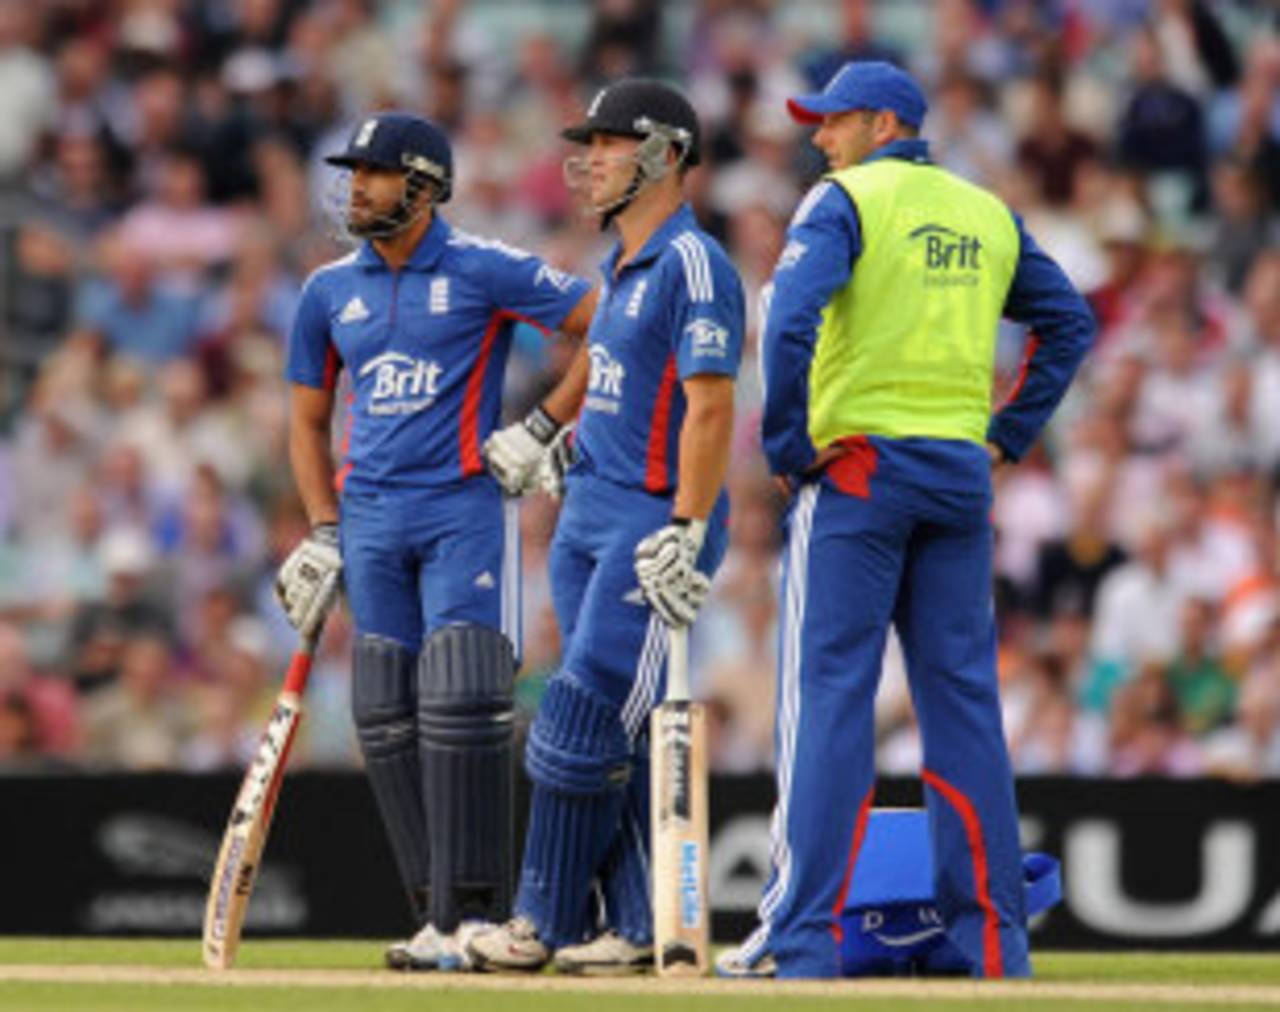 Ravi Bopara and Jonathan Trott watch the big screen during an decision review, England v South Africa, 3rd NatWest ODI, The Oval, August 31, 2012